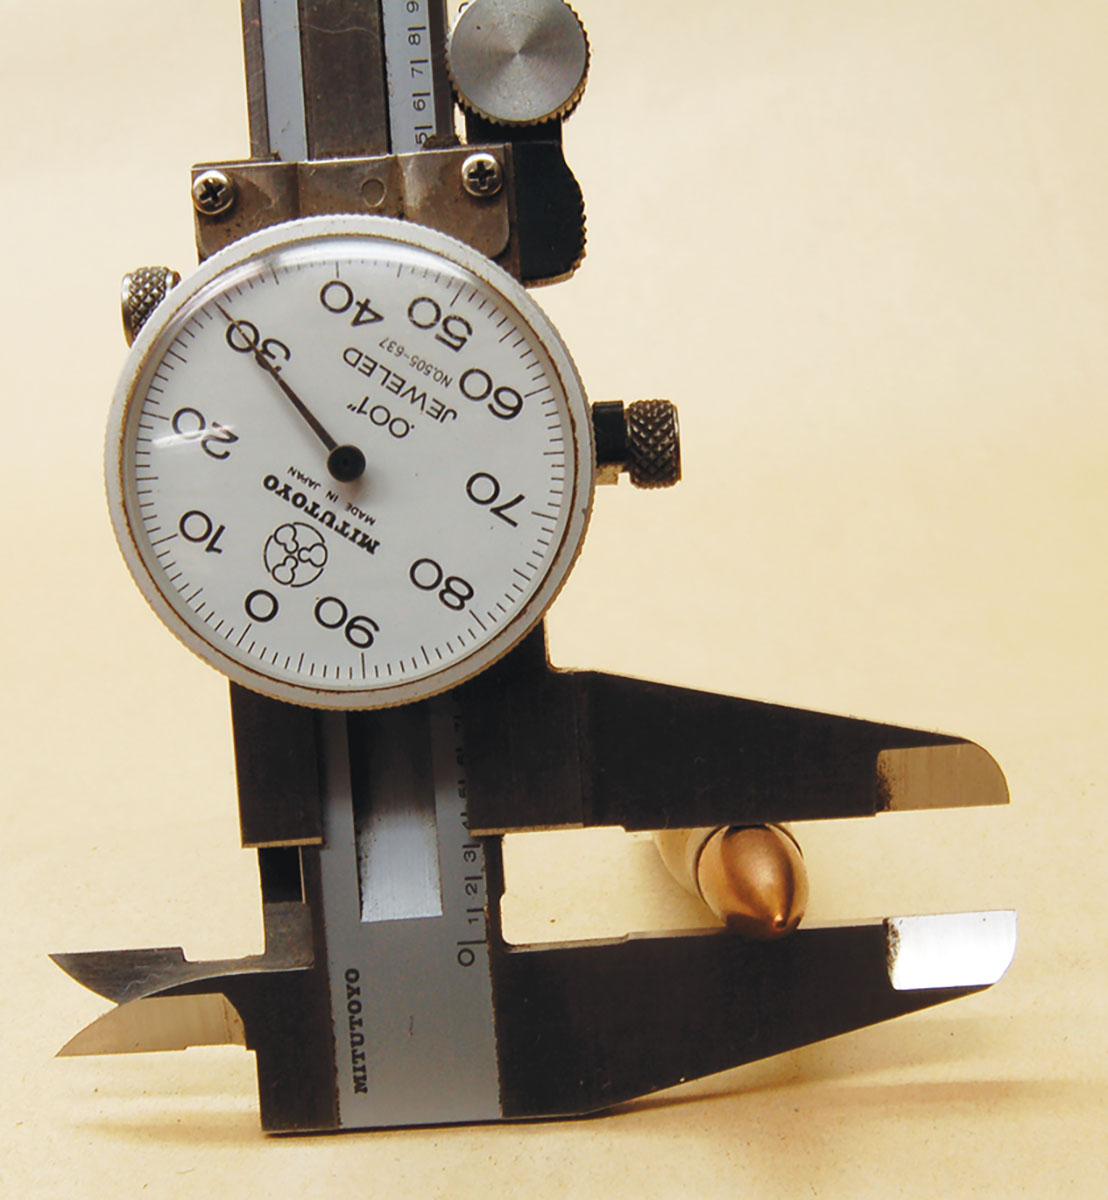 The caliper on the bullet of an 8x56mmR showing .330-inch diameter, not .323 inch of the 8x50mmR.